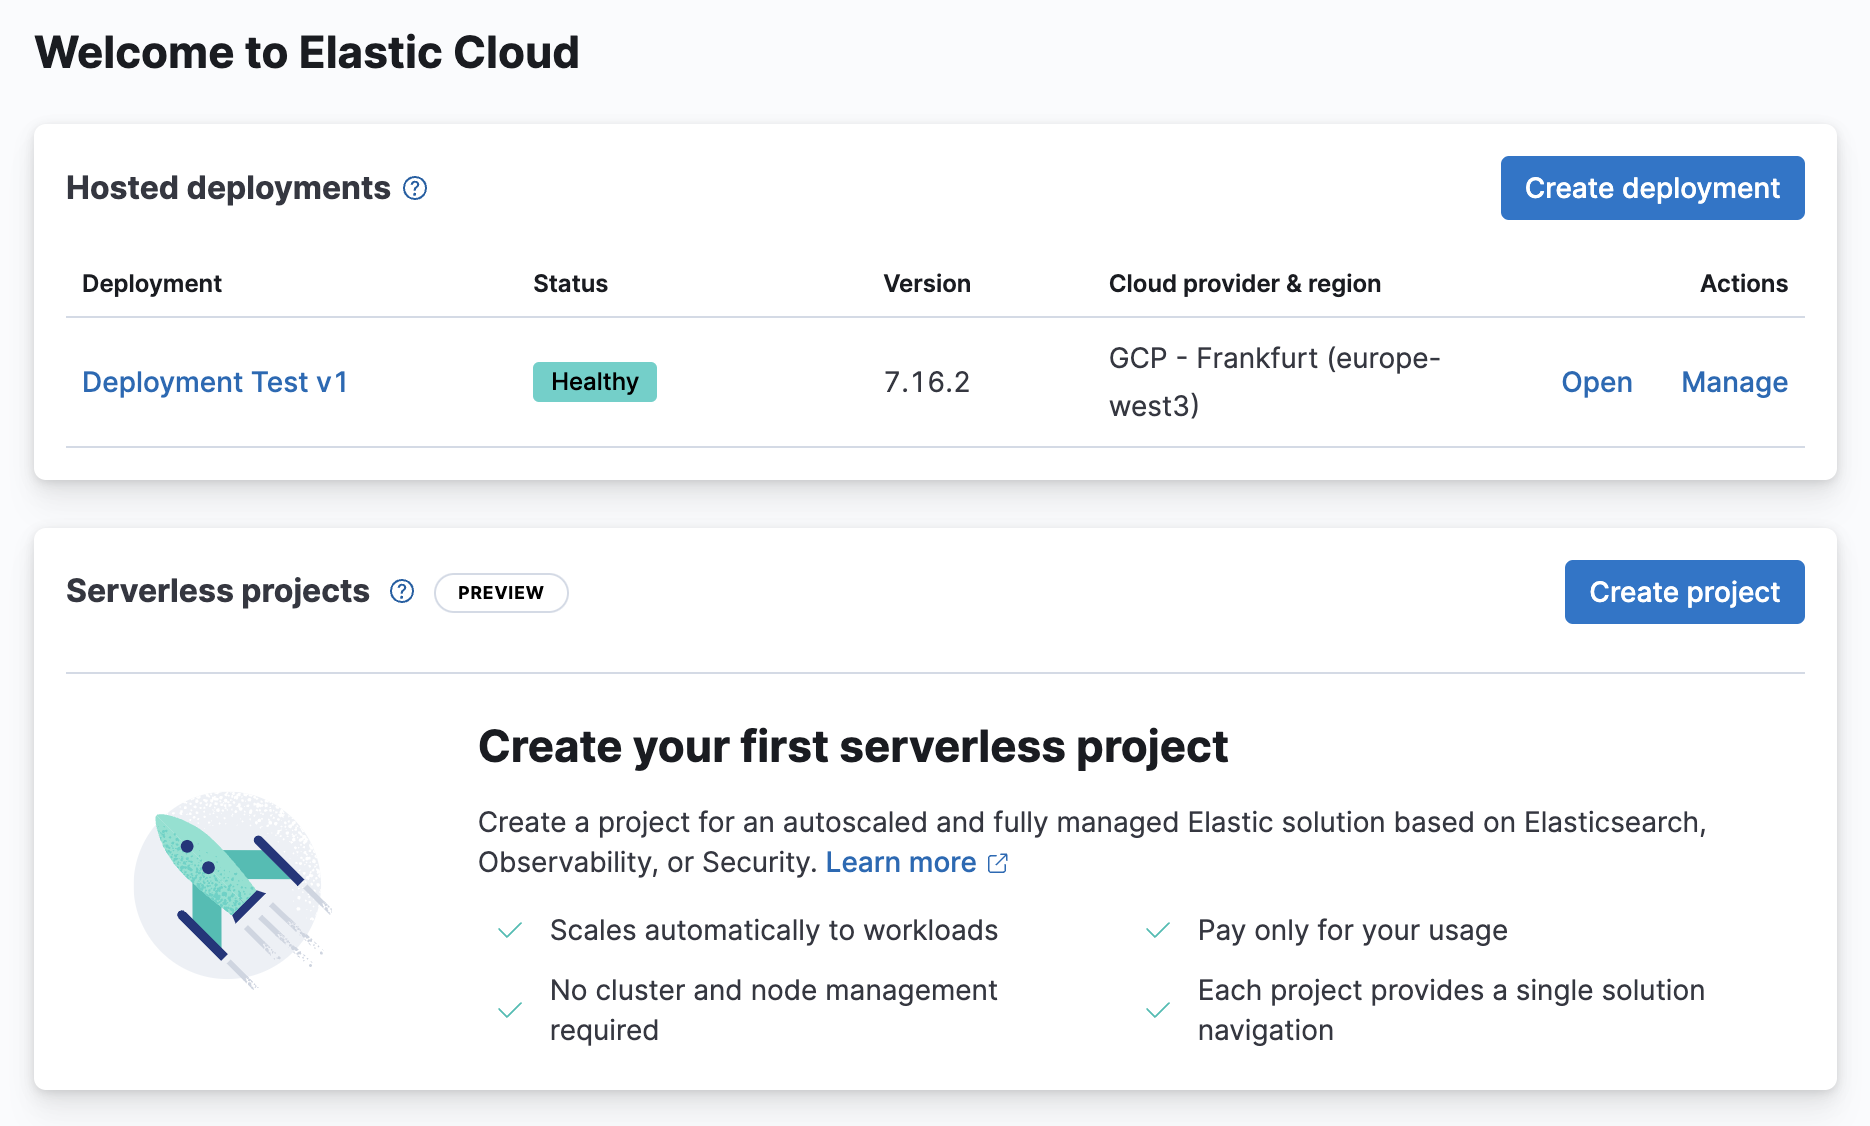 serverless projects